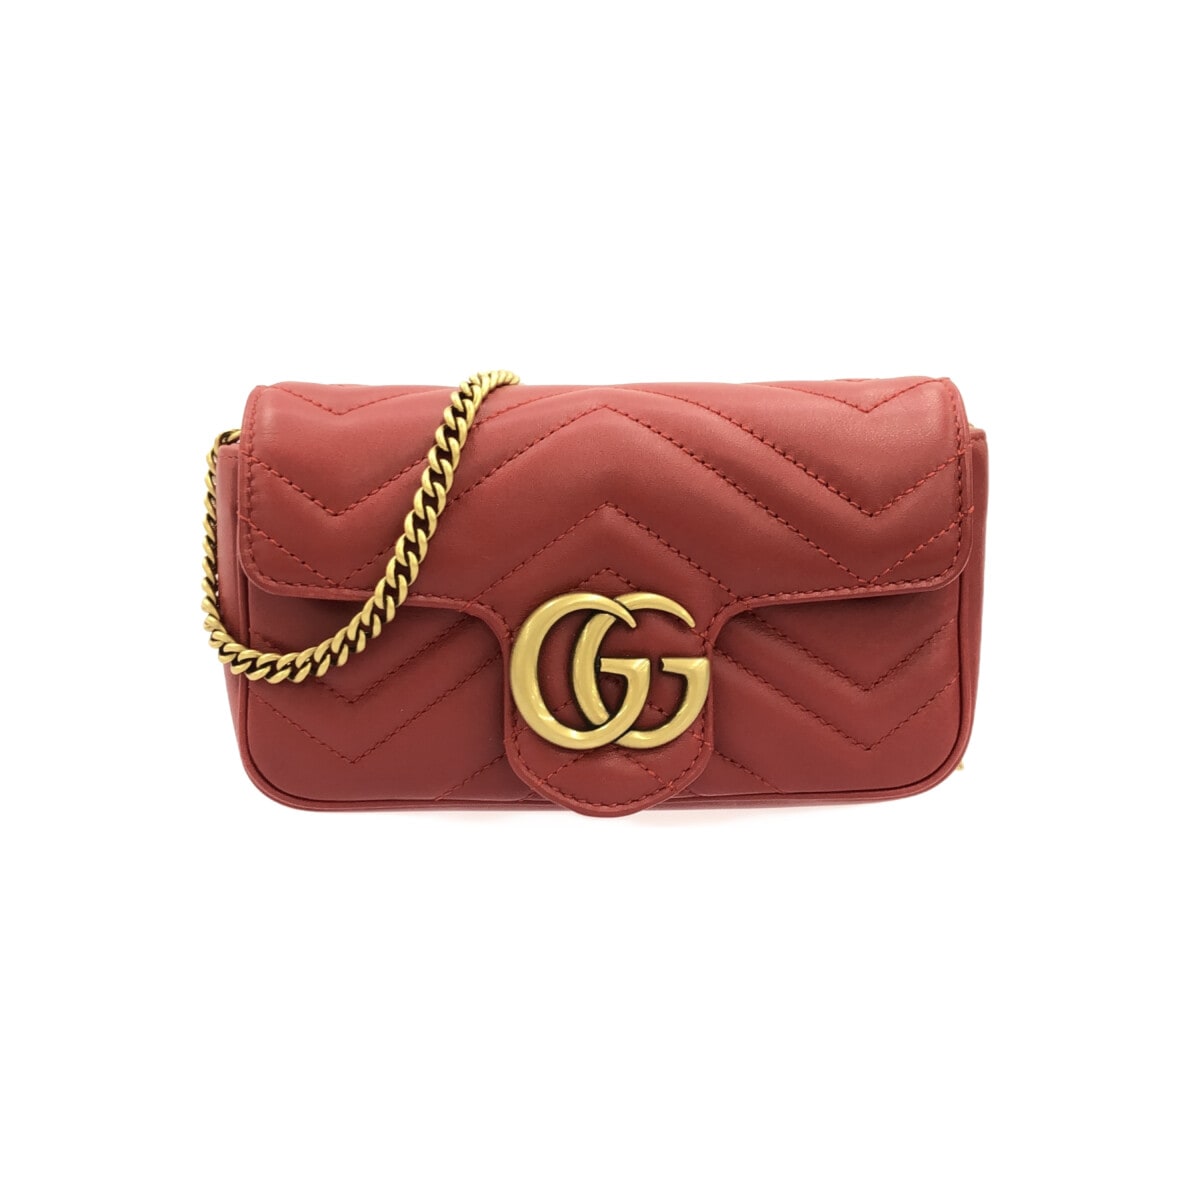 GUCCI - GG Marmont Quilted Leather Super Mini Bag